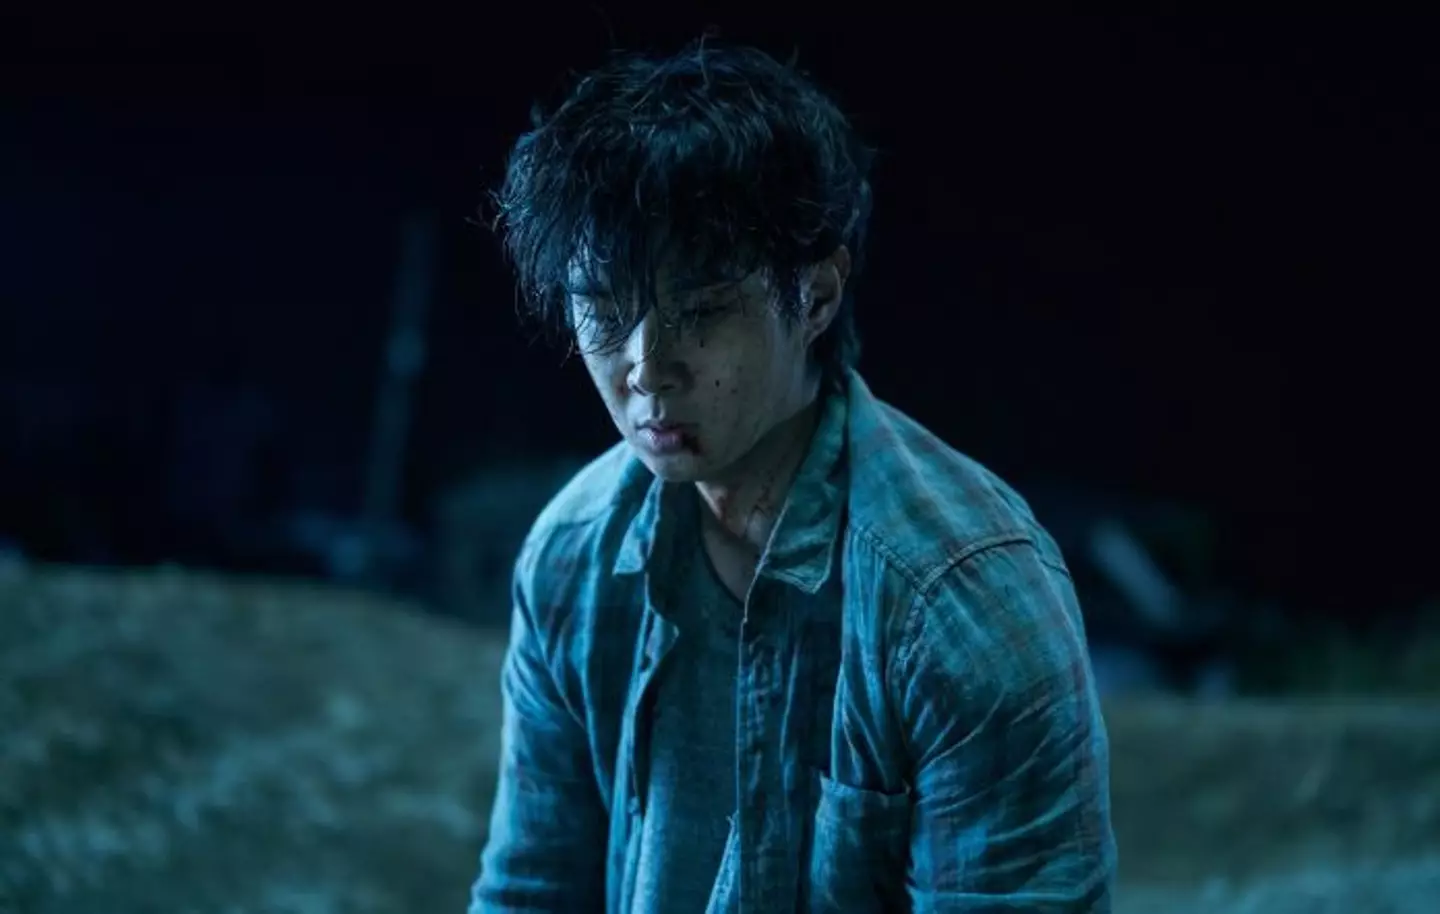 Lee Tang is the protagonist of this anti-hero story.